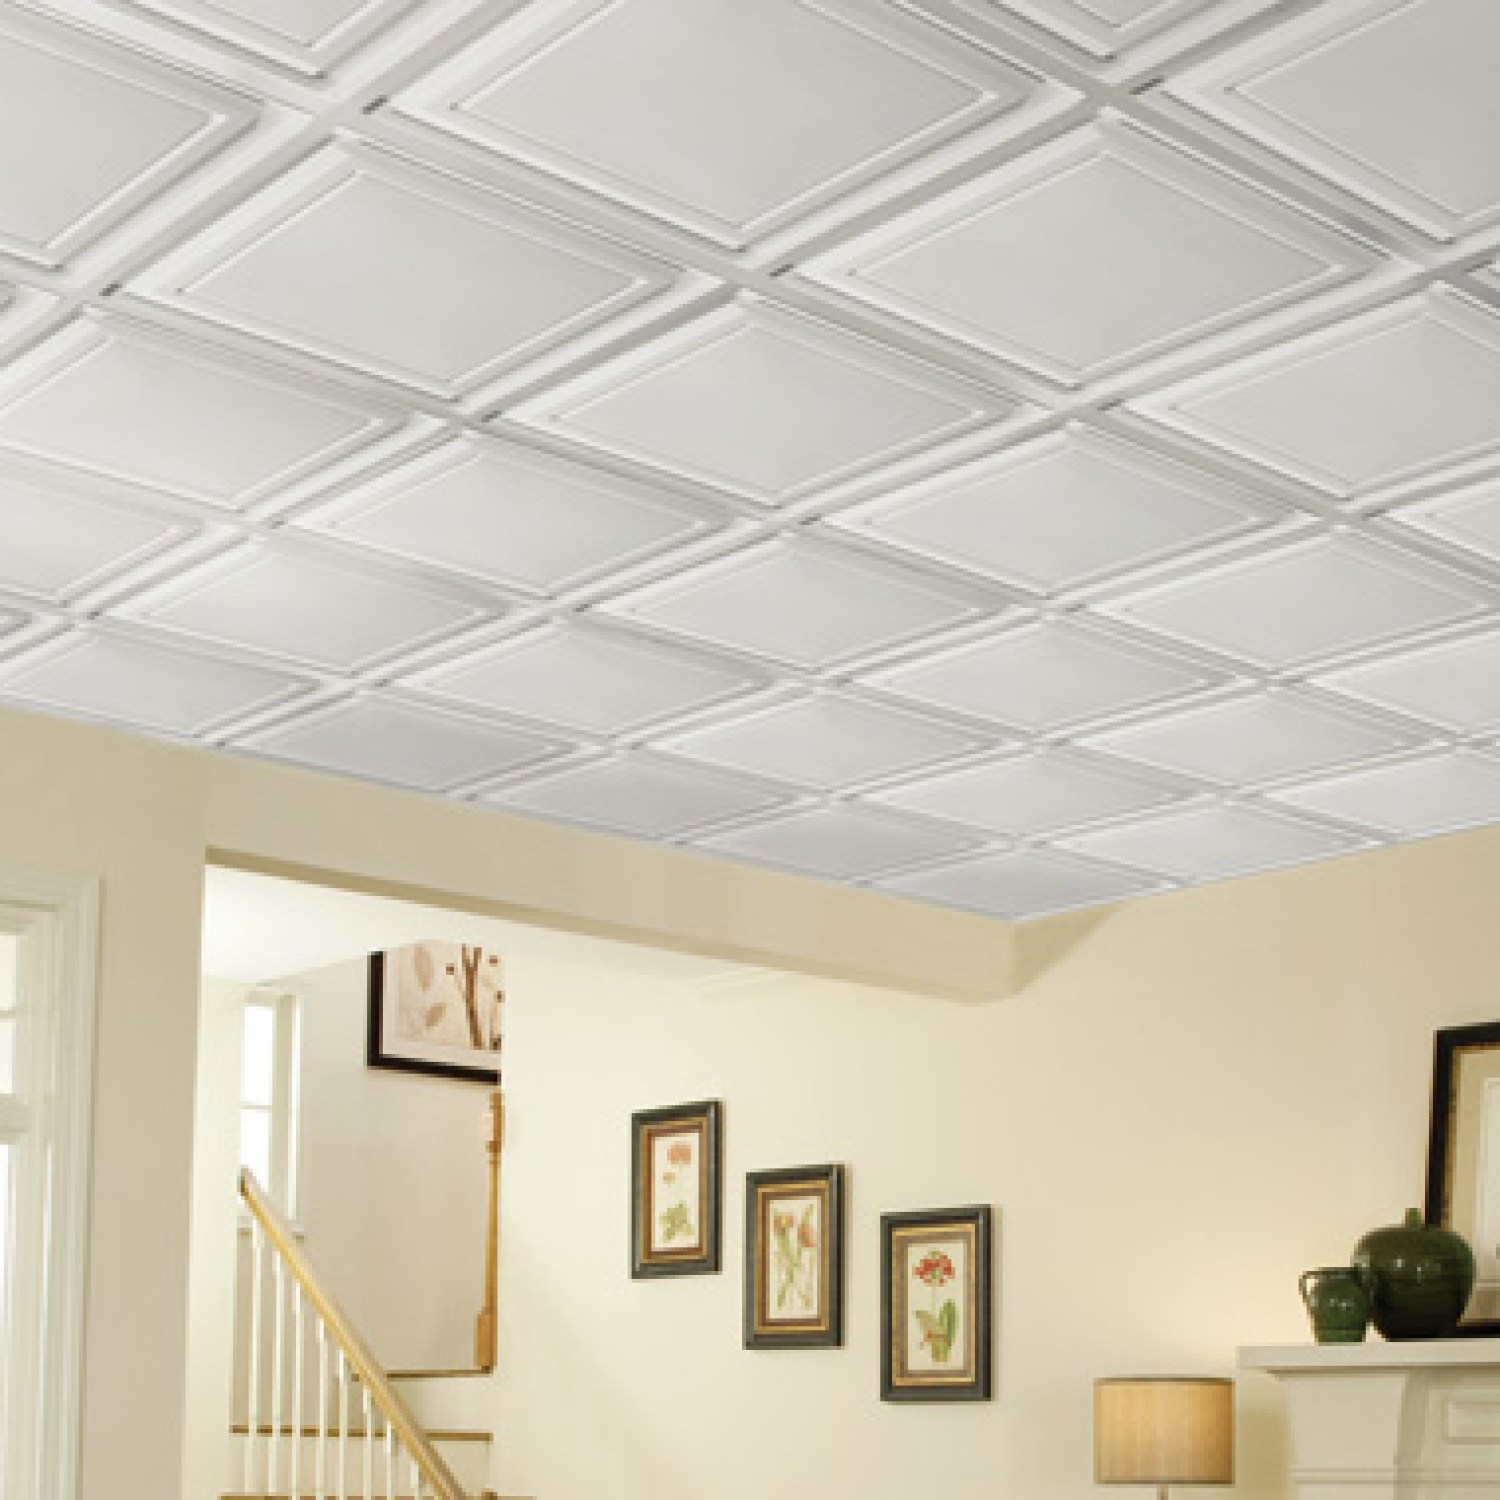 Coffered ceiling tiles in basement